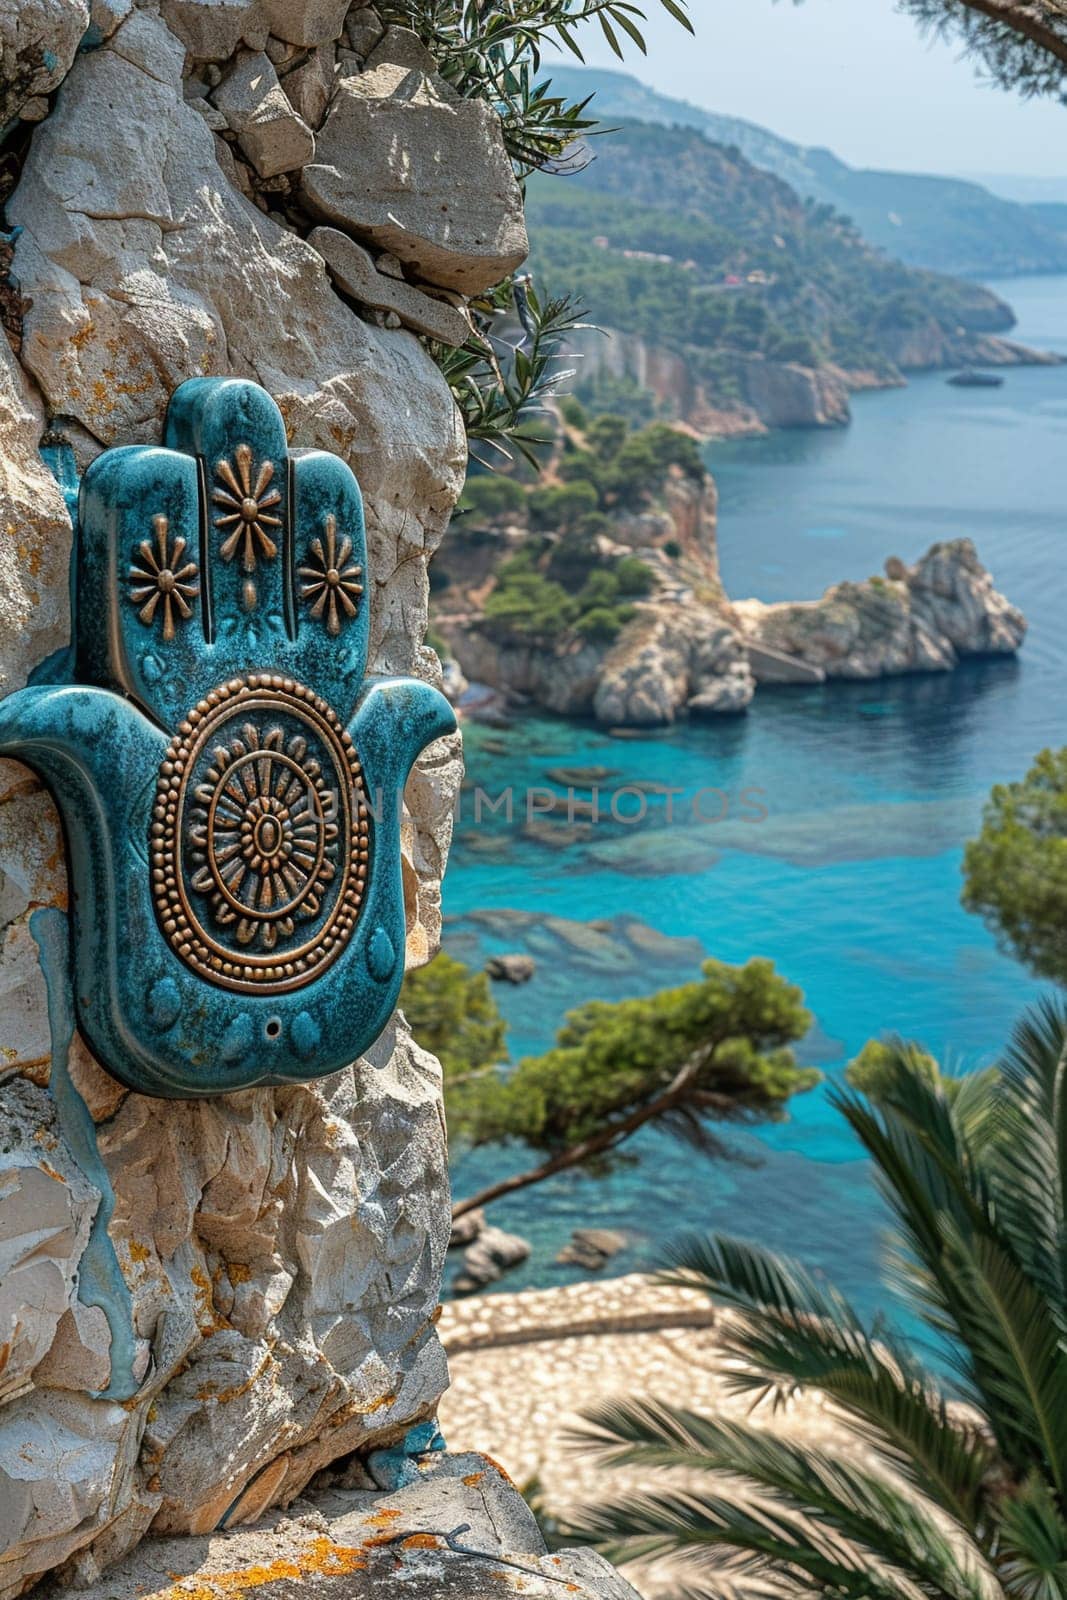 Hamsa Hand Amulets Overlooking a Mediterranean Seascape, The protective symbols blur with the sea, guarding against the evil eye.